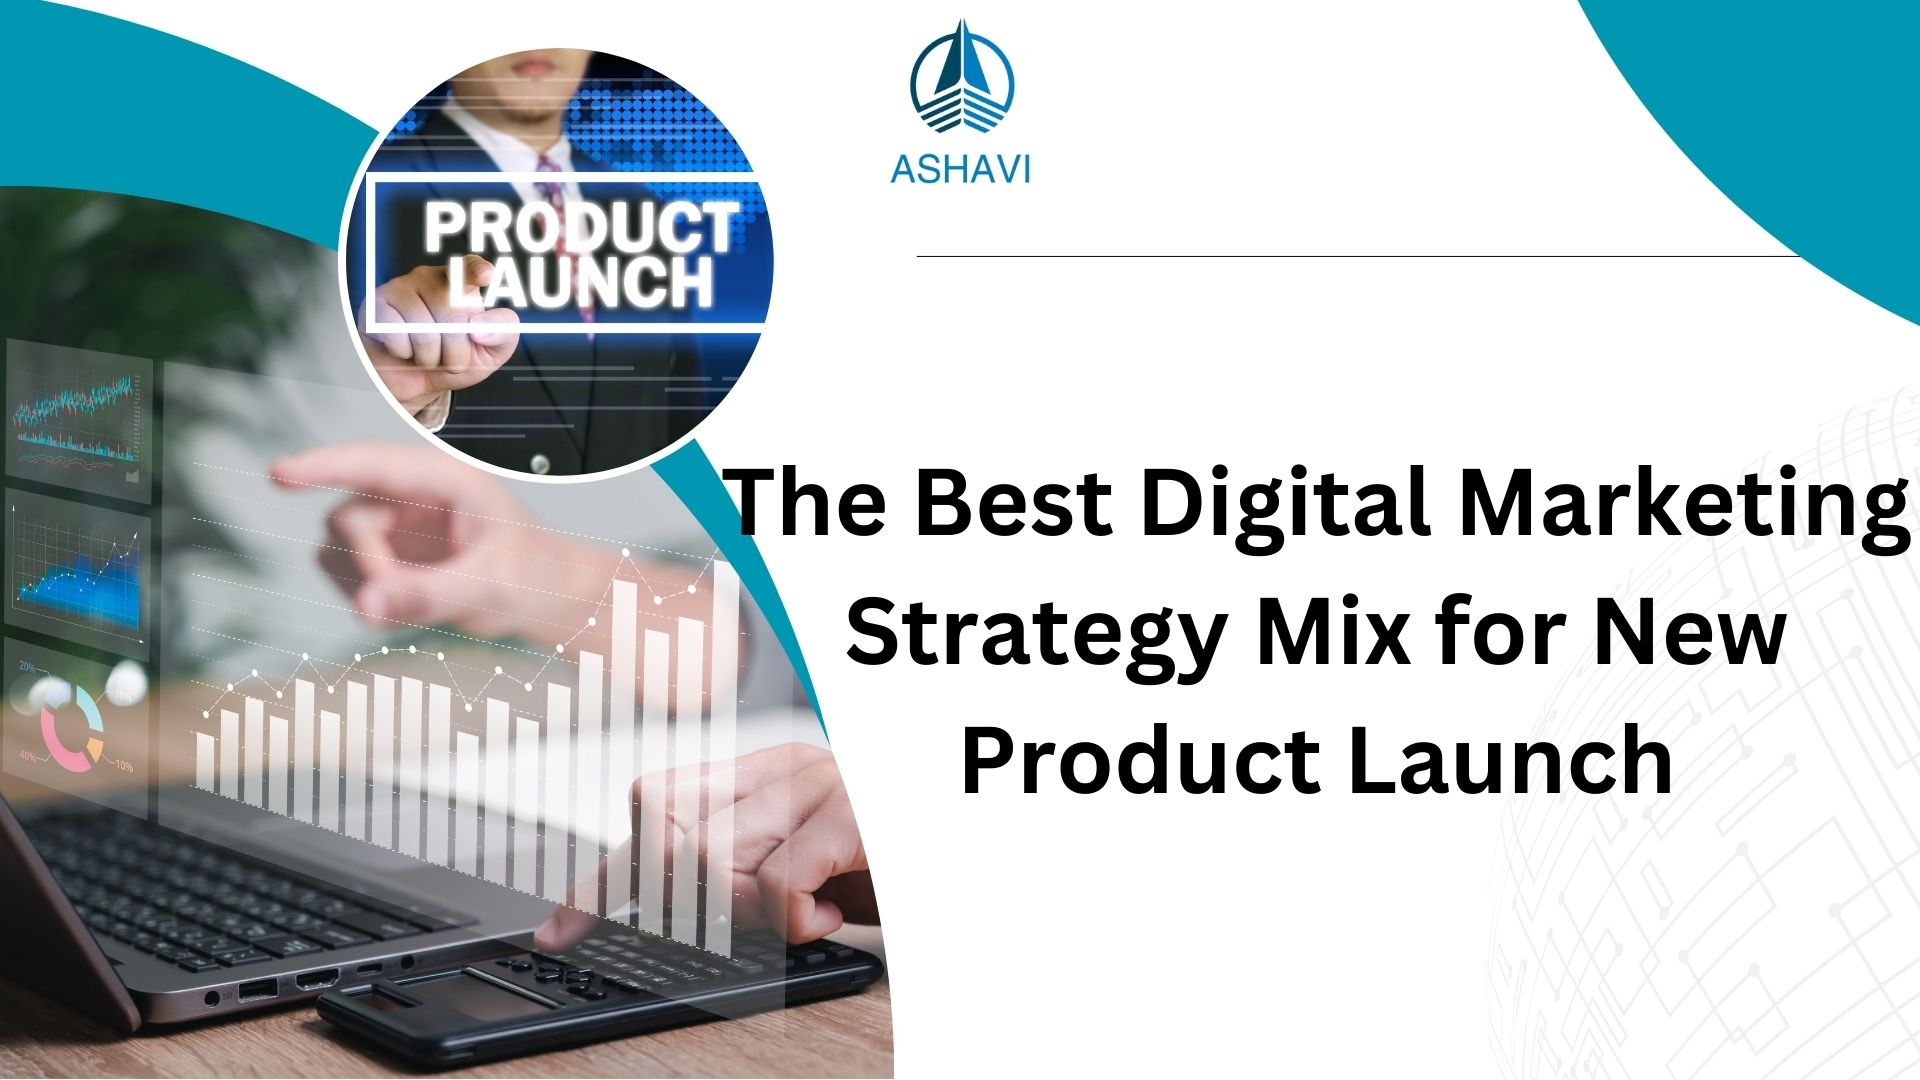 The Best Digital Marketing Strategy Mix for New Product Launch